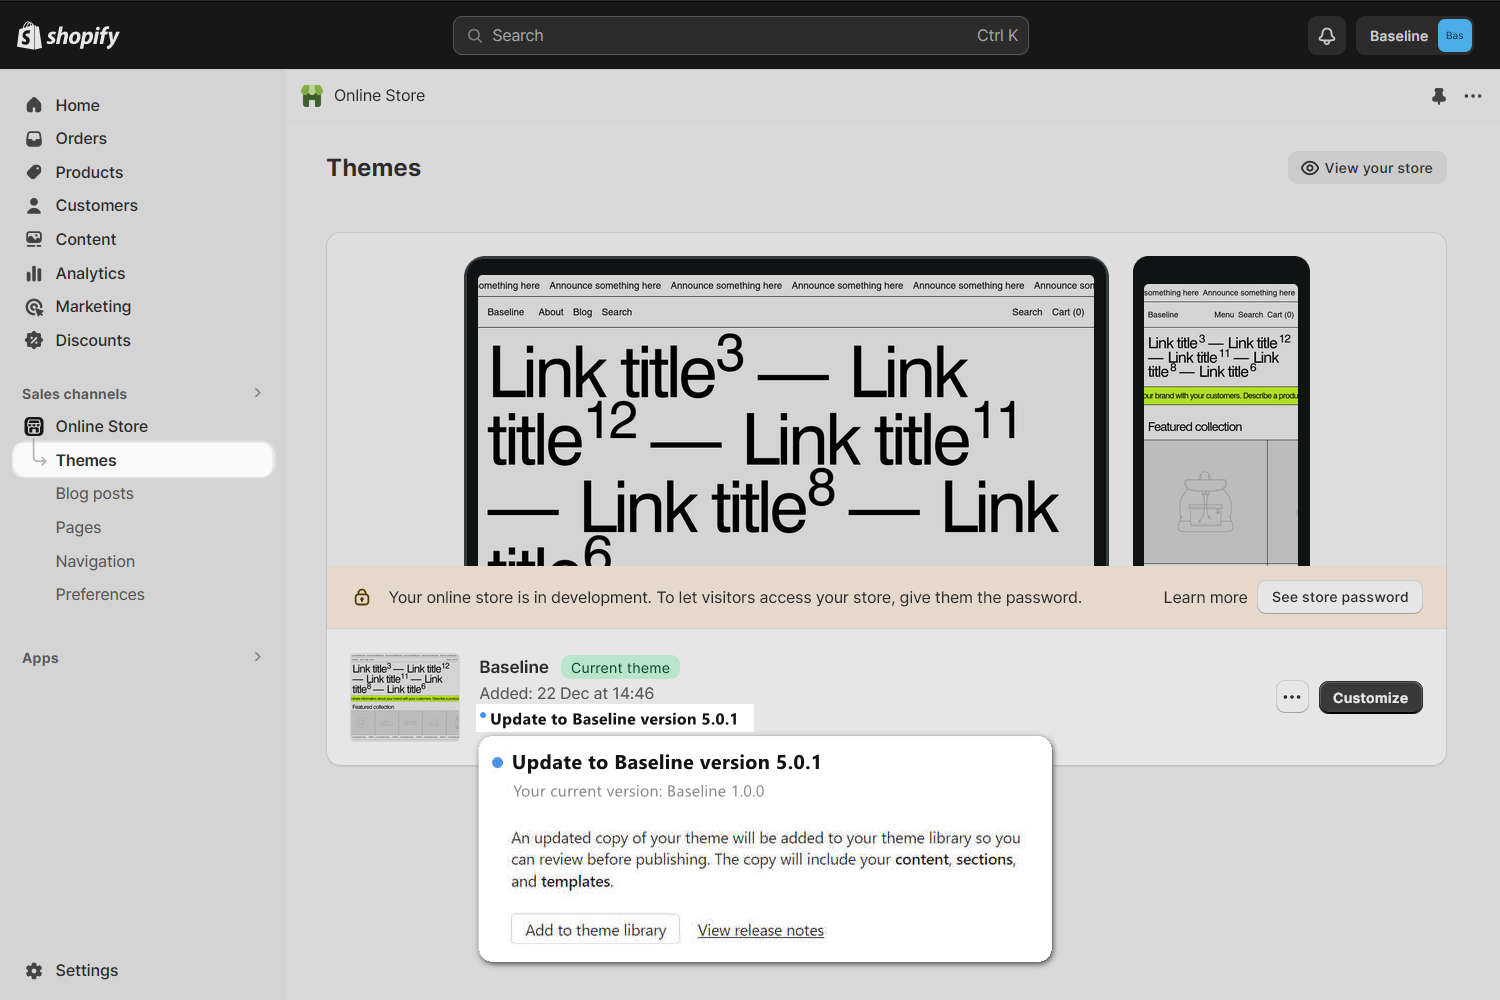 Screenshot of the Baseline theme on the Shopify Theme Store with an Add to theme library button.